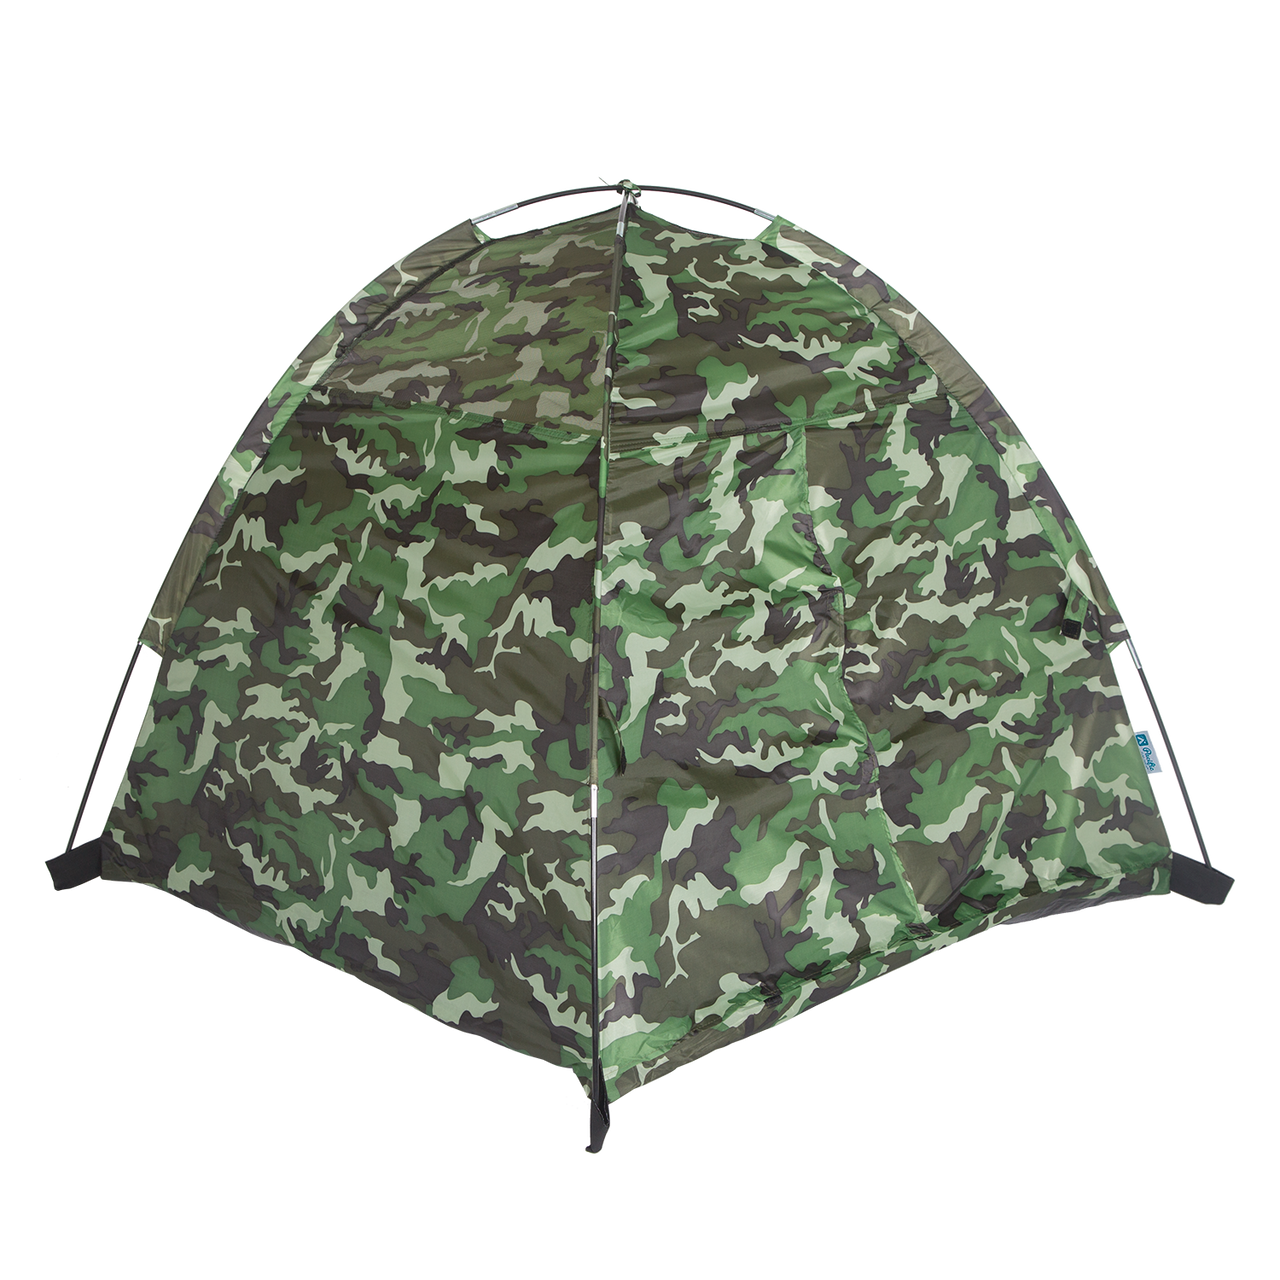 Green Camo Delta Children Teepee Play Tent and Matching Sleeping Bag Set for Kids 